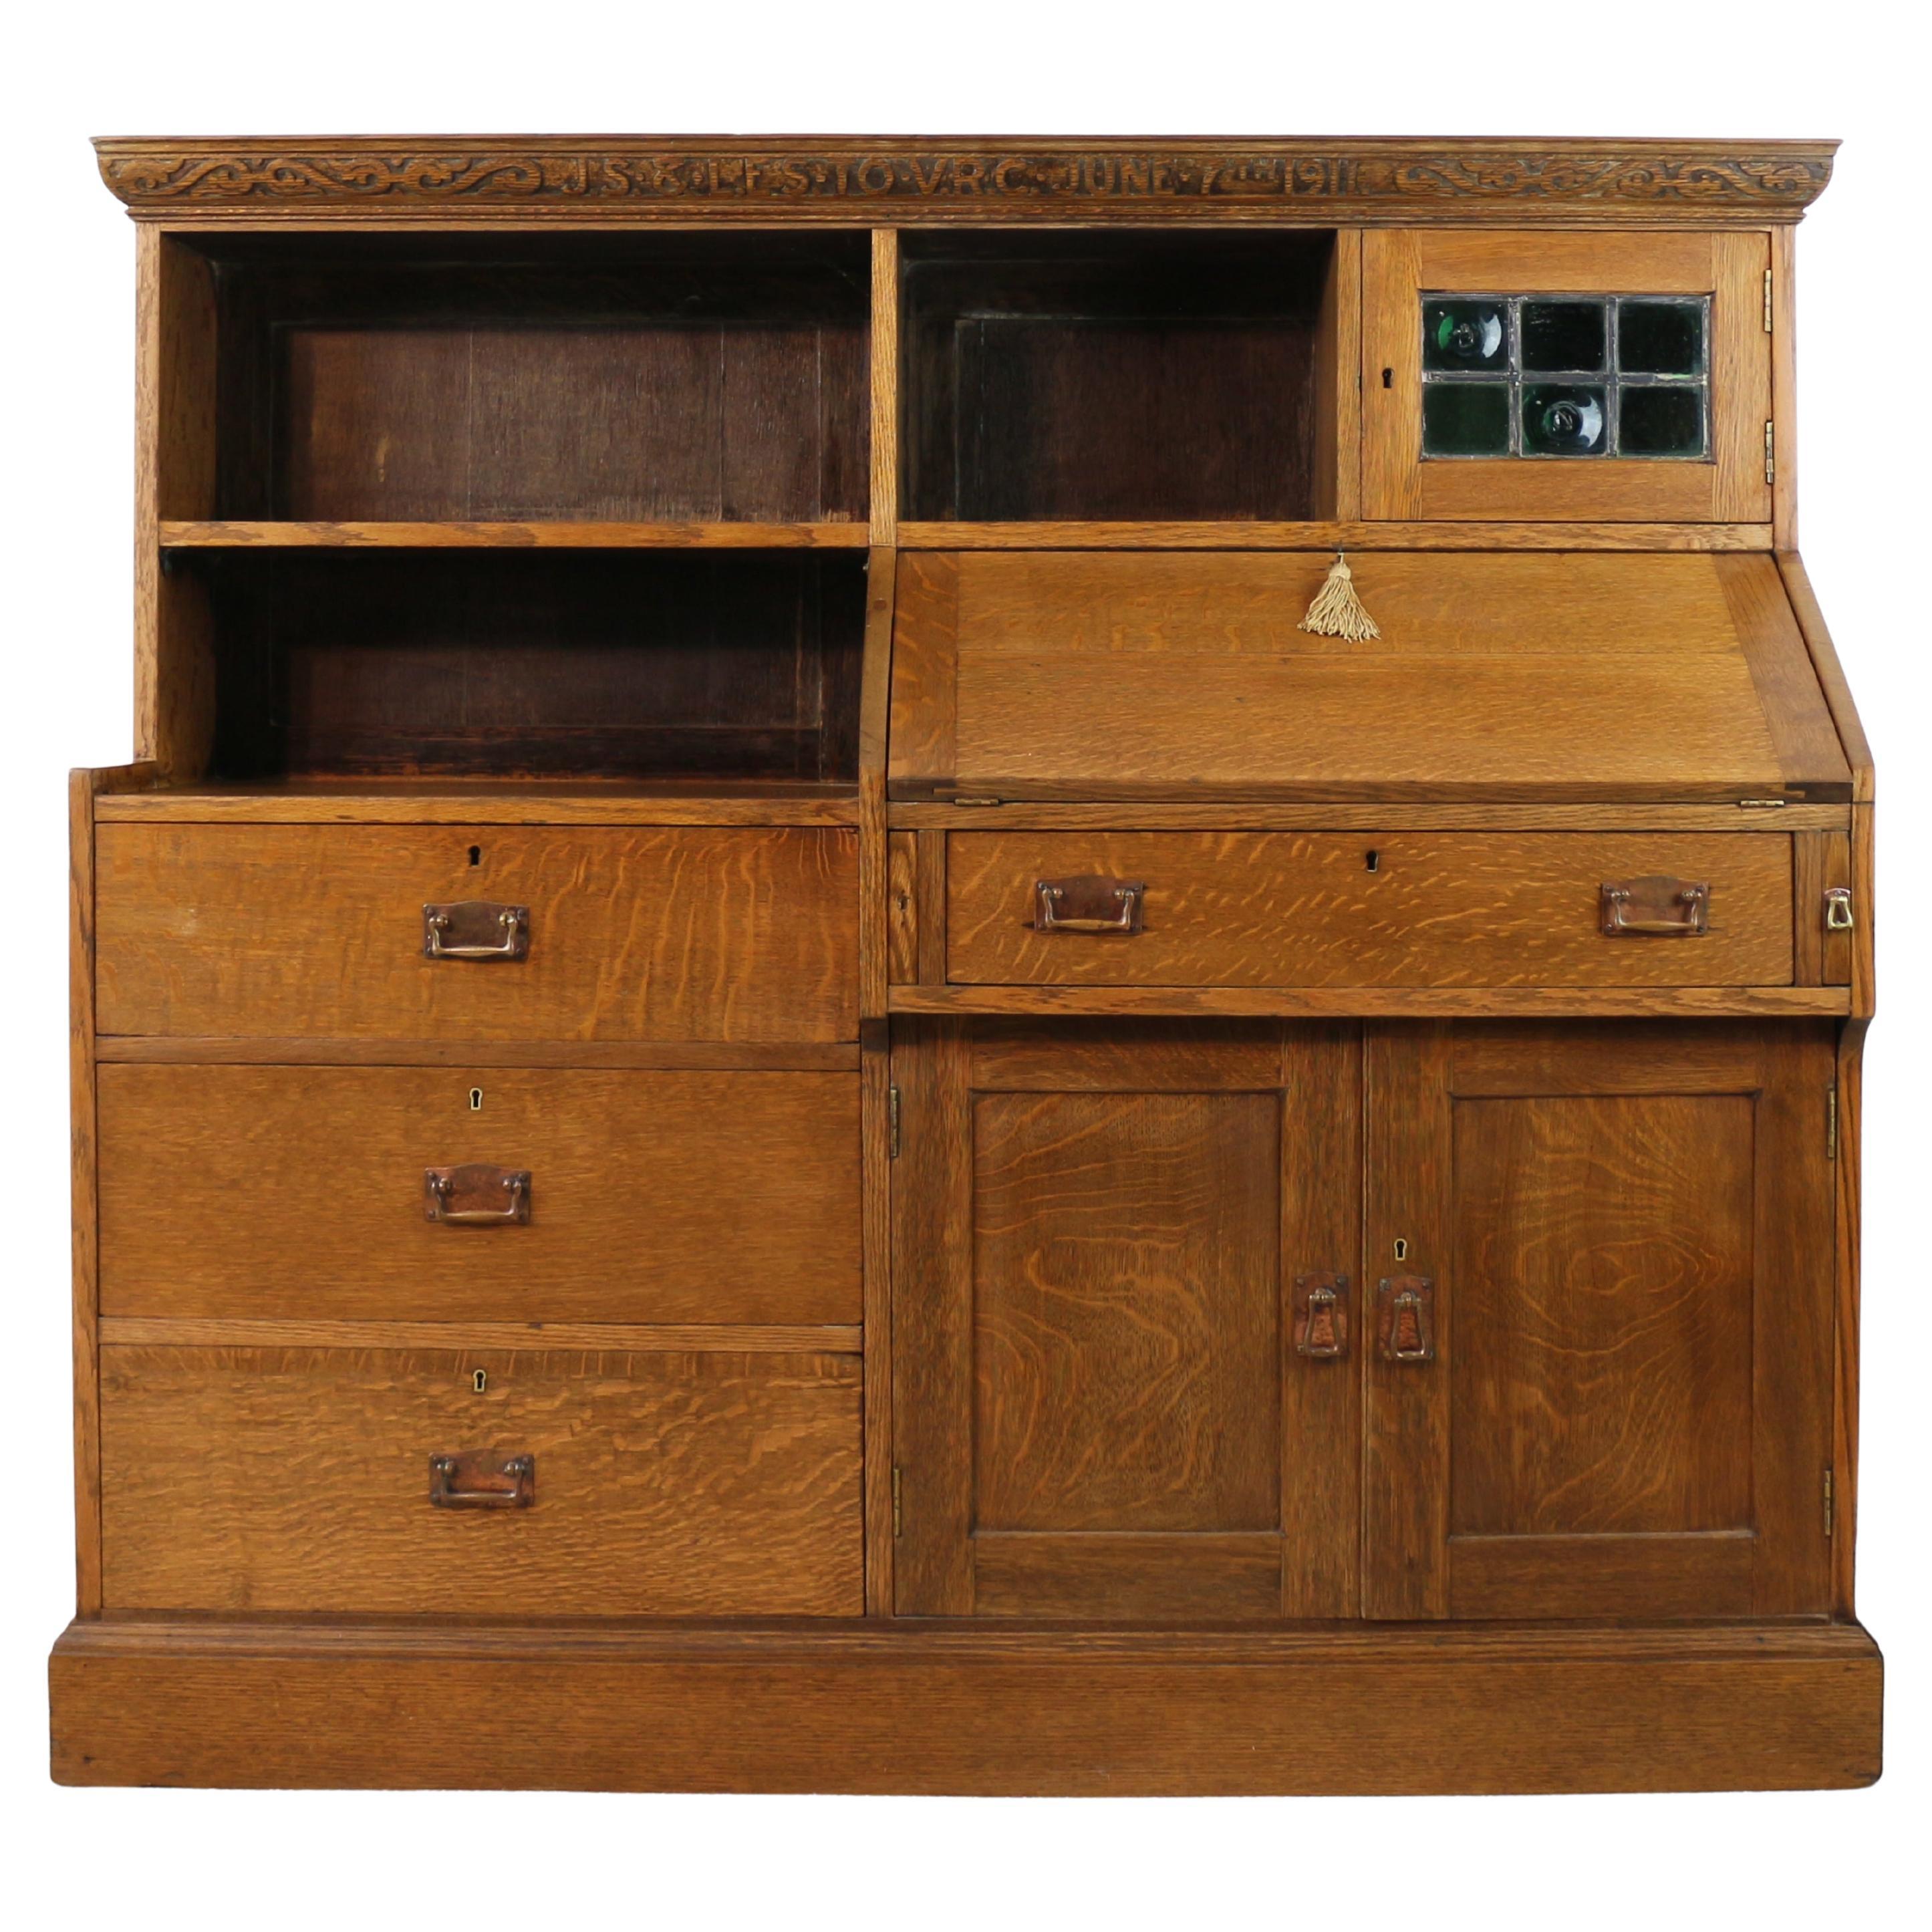 Antique English Arts & Crafts Oak Bureau Bookcase Attributed to Liberty & Co For Sale